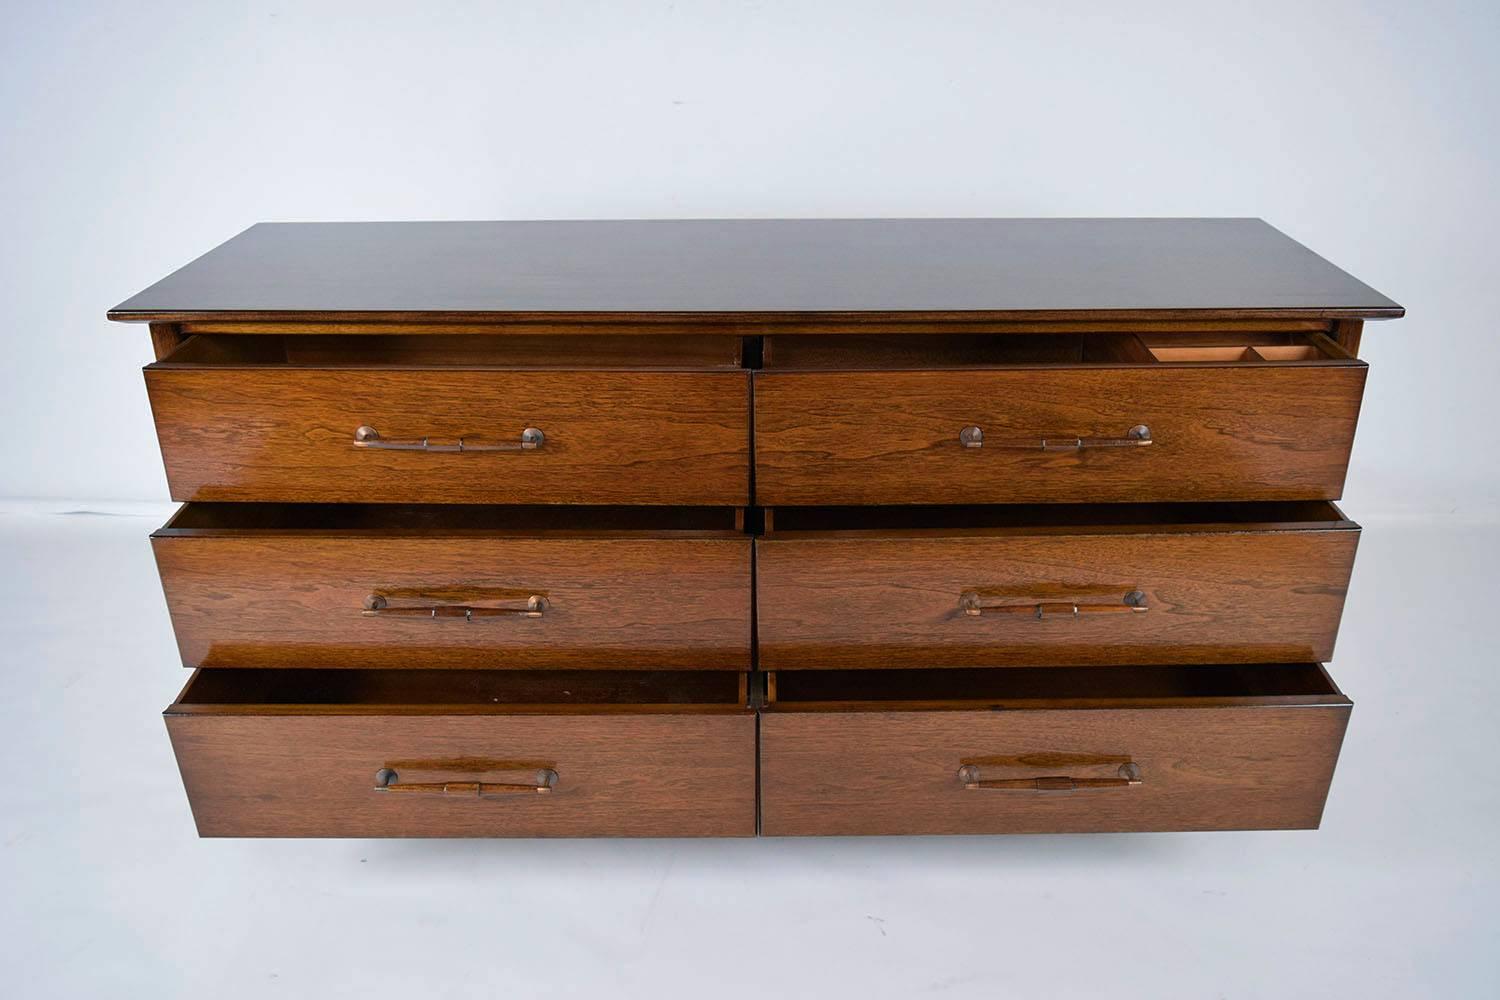 This 1960s Mid-Century Modern style dresser is designed by American of Martinsville. The teakwood dresser is finished in a rich dark walnut color stain. The elegant dresser features six drawers that are adorned with wood and brass handles. The